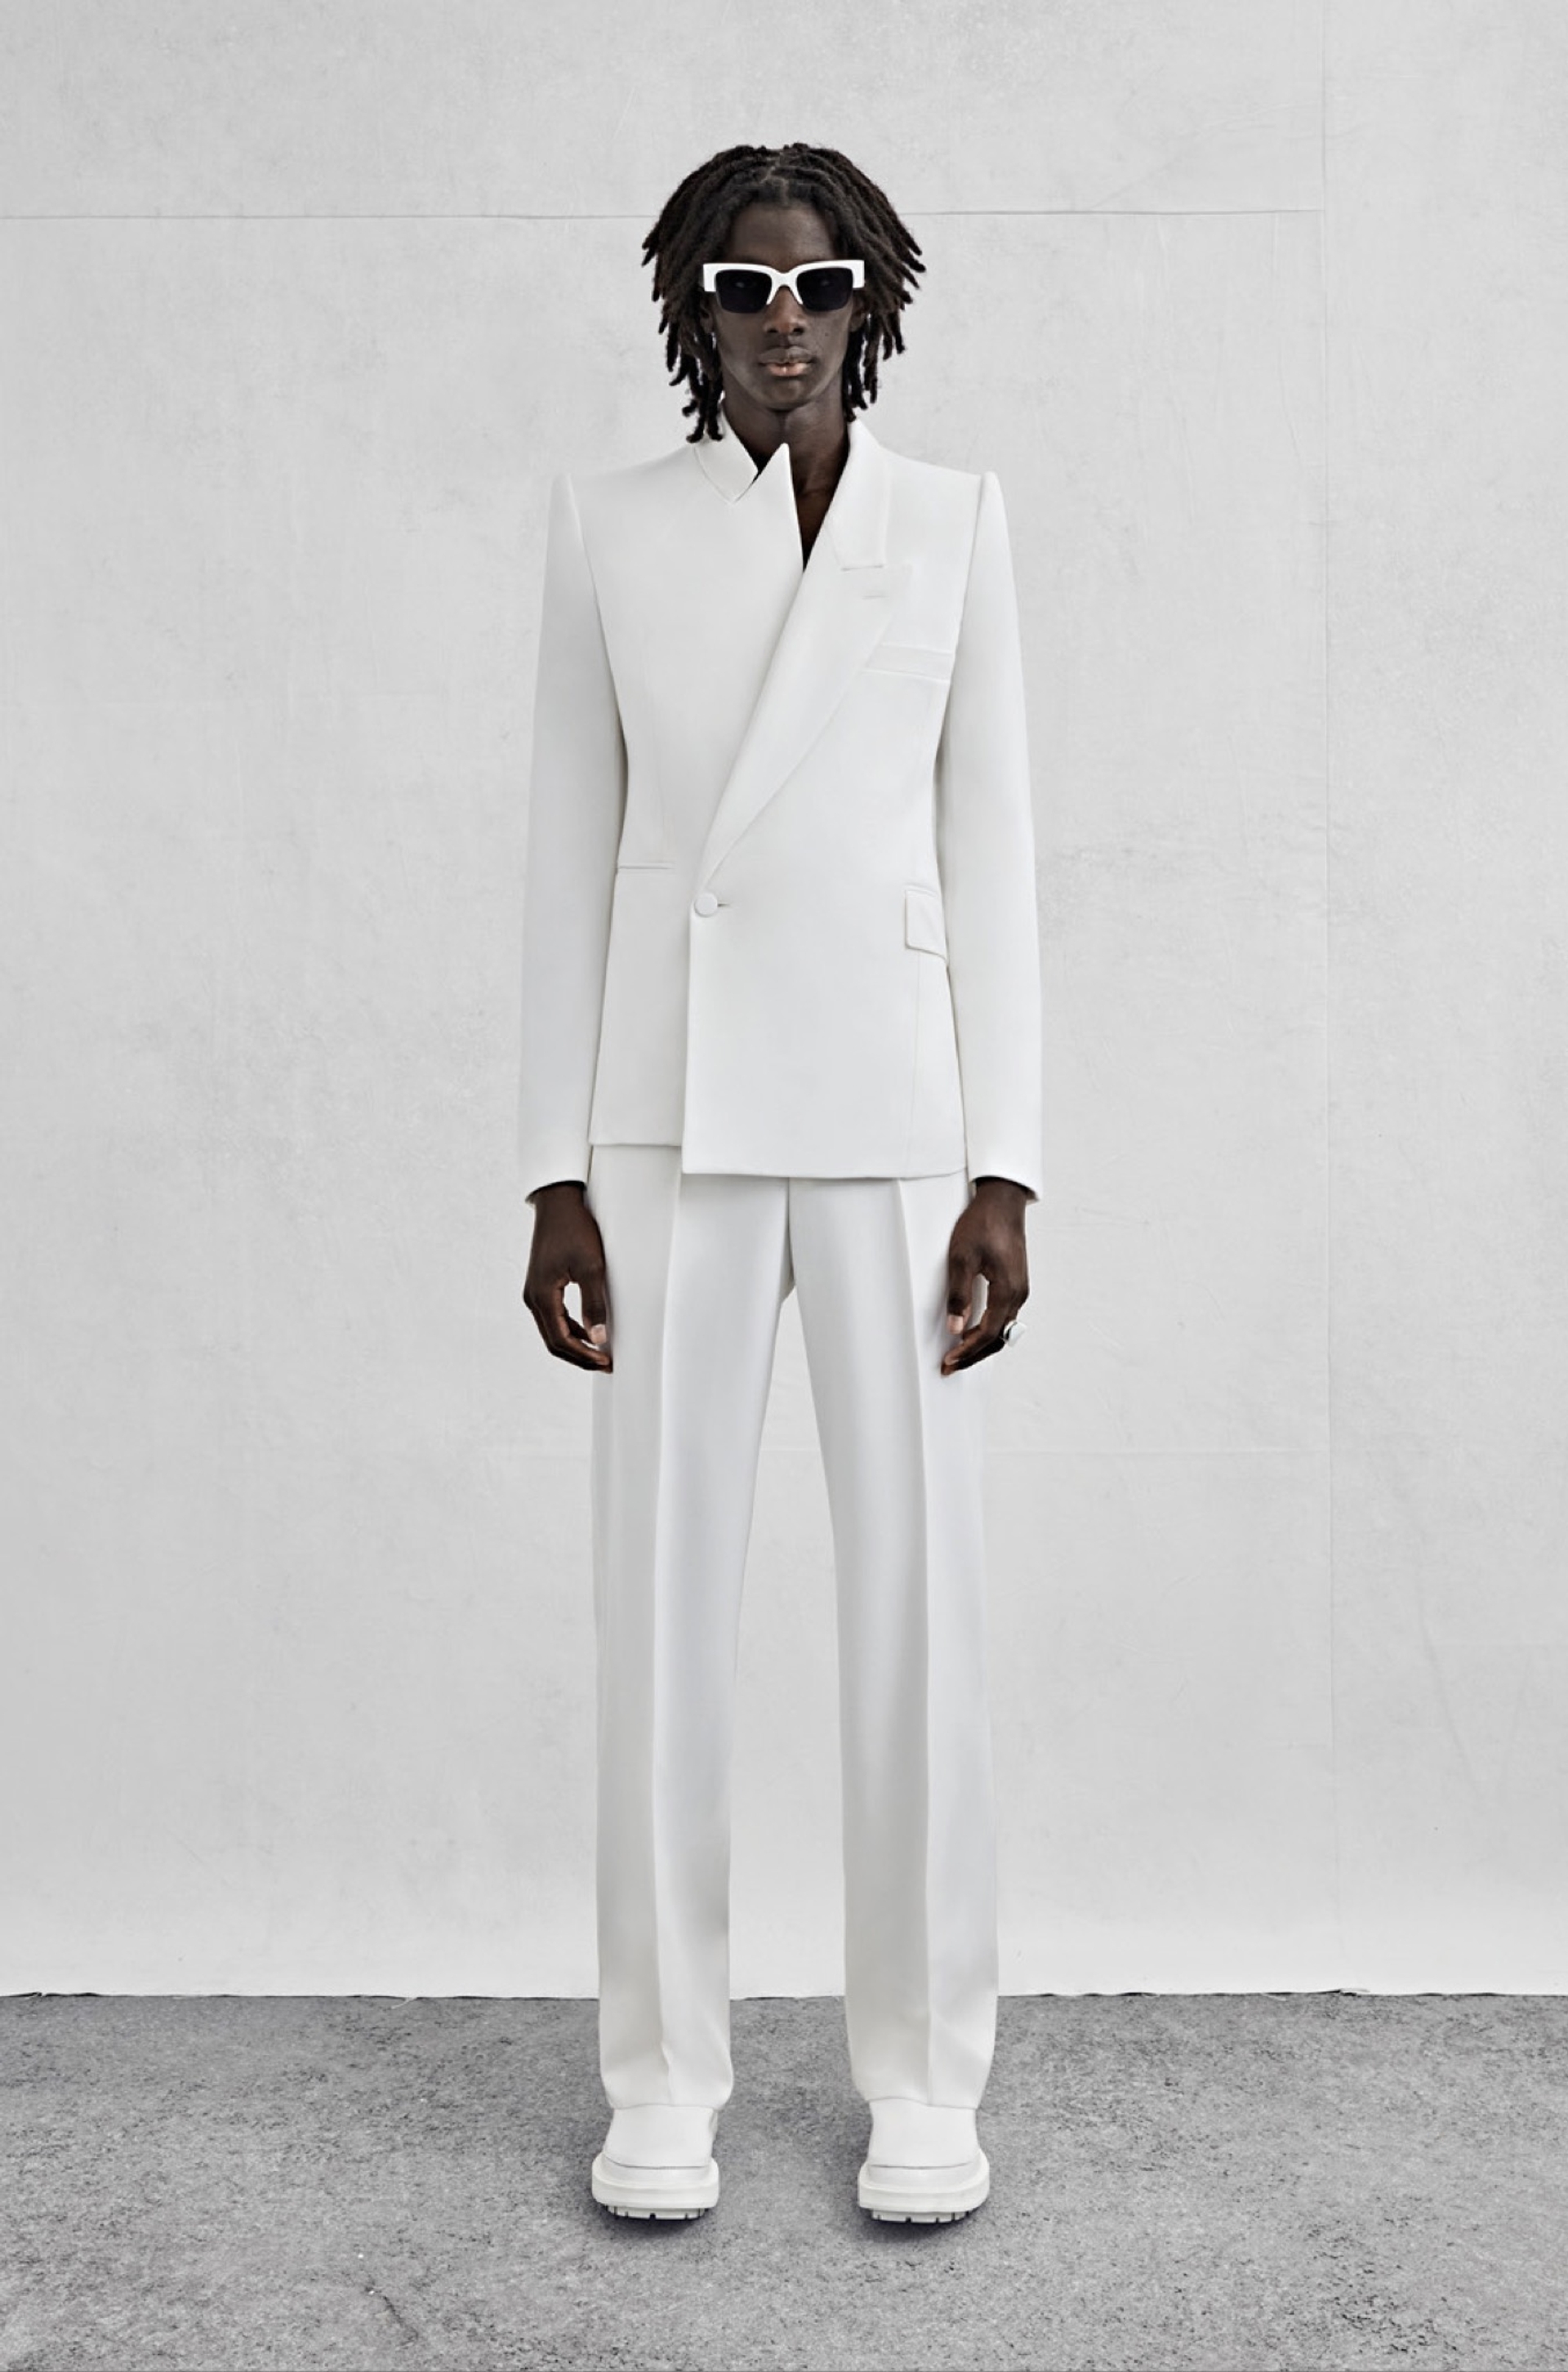 An asymmetric tailored jacket and wide-legged trousers in ivory grain de poudre.